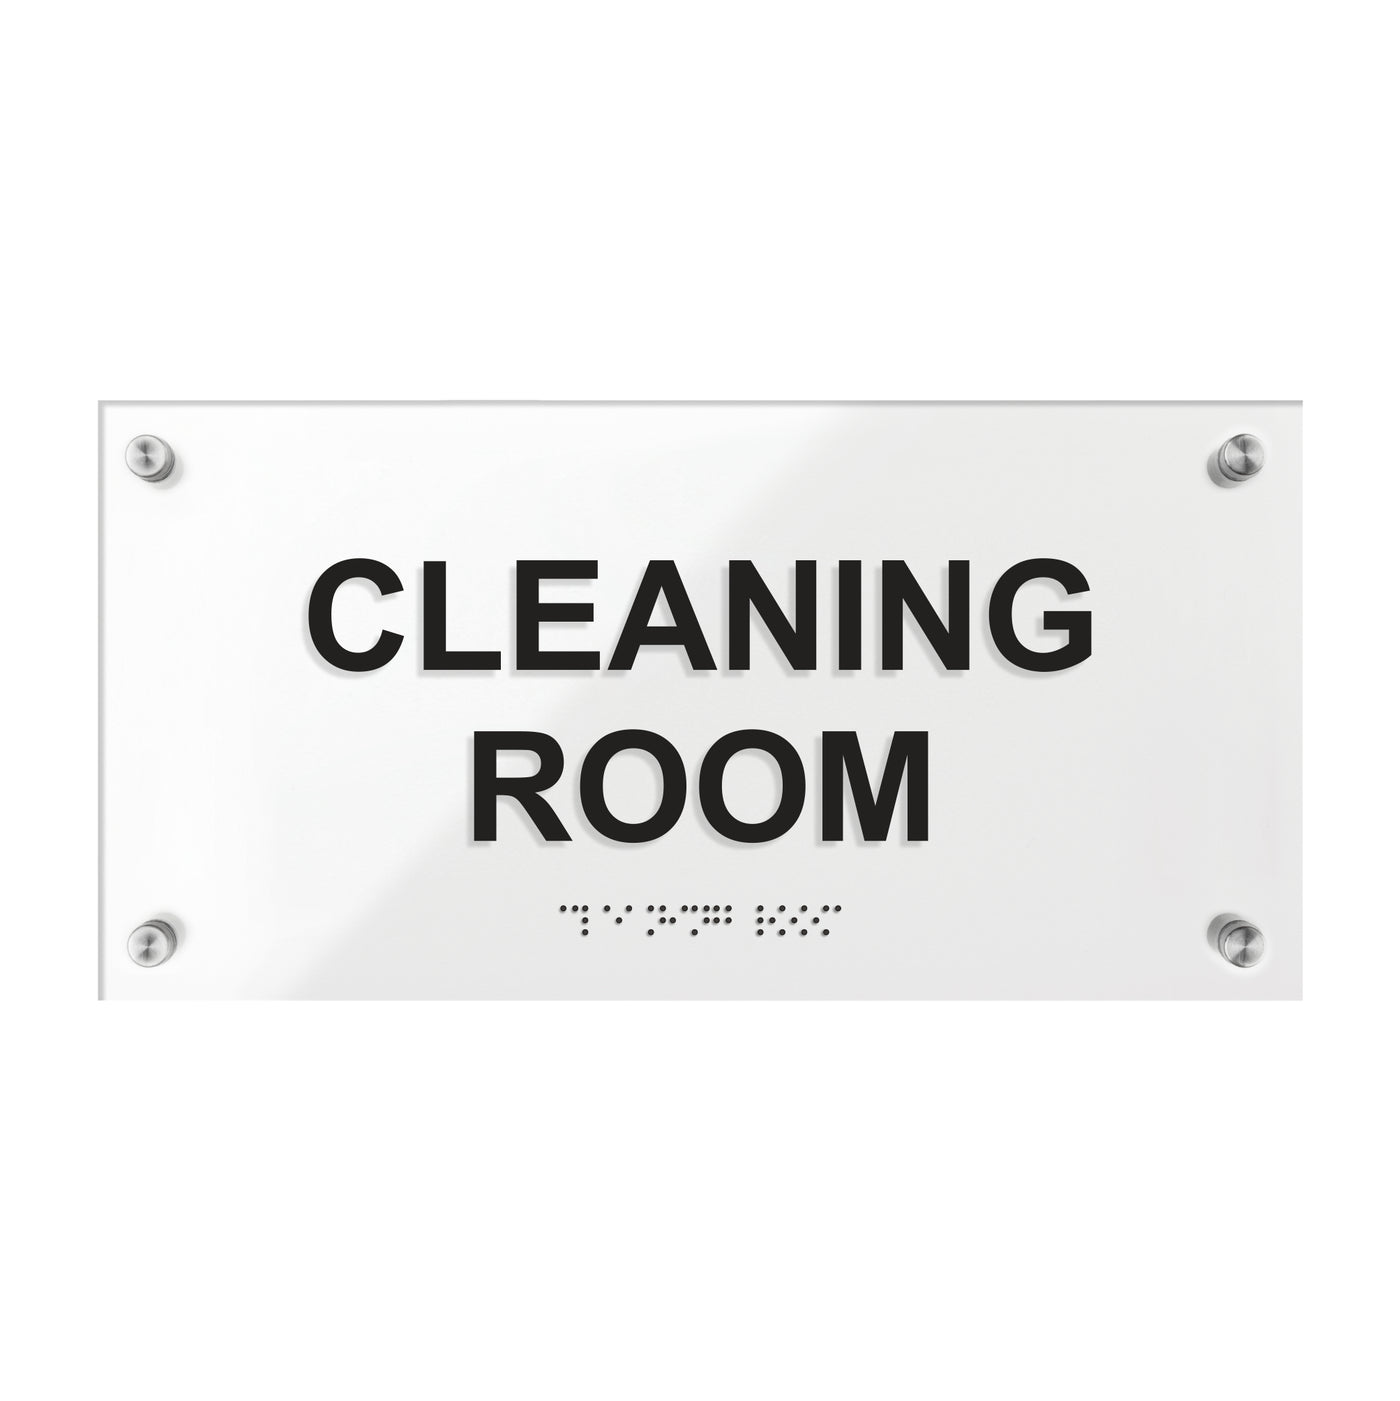 Acrylic Cleaning Room Sign with Braille "Classic" Design